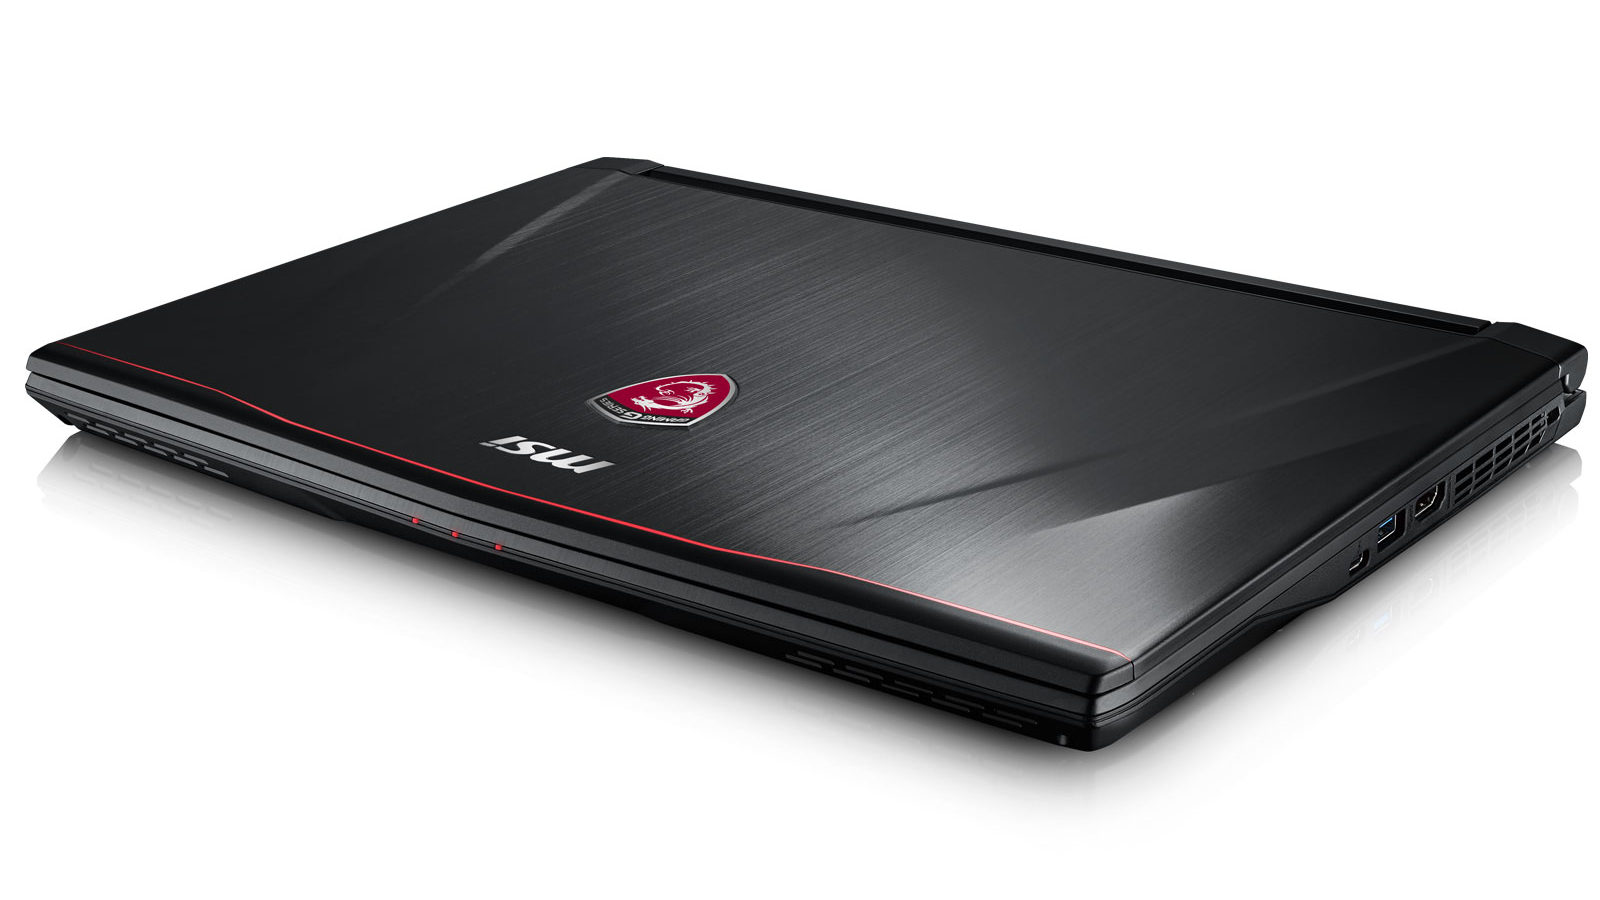 The sharp-looking MSI GS43VR gaming notebook.